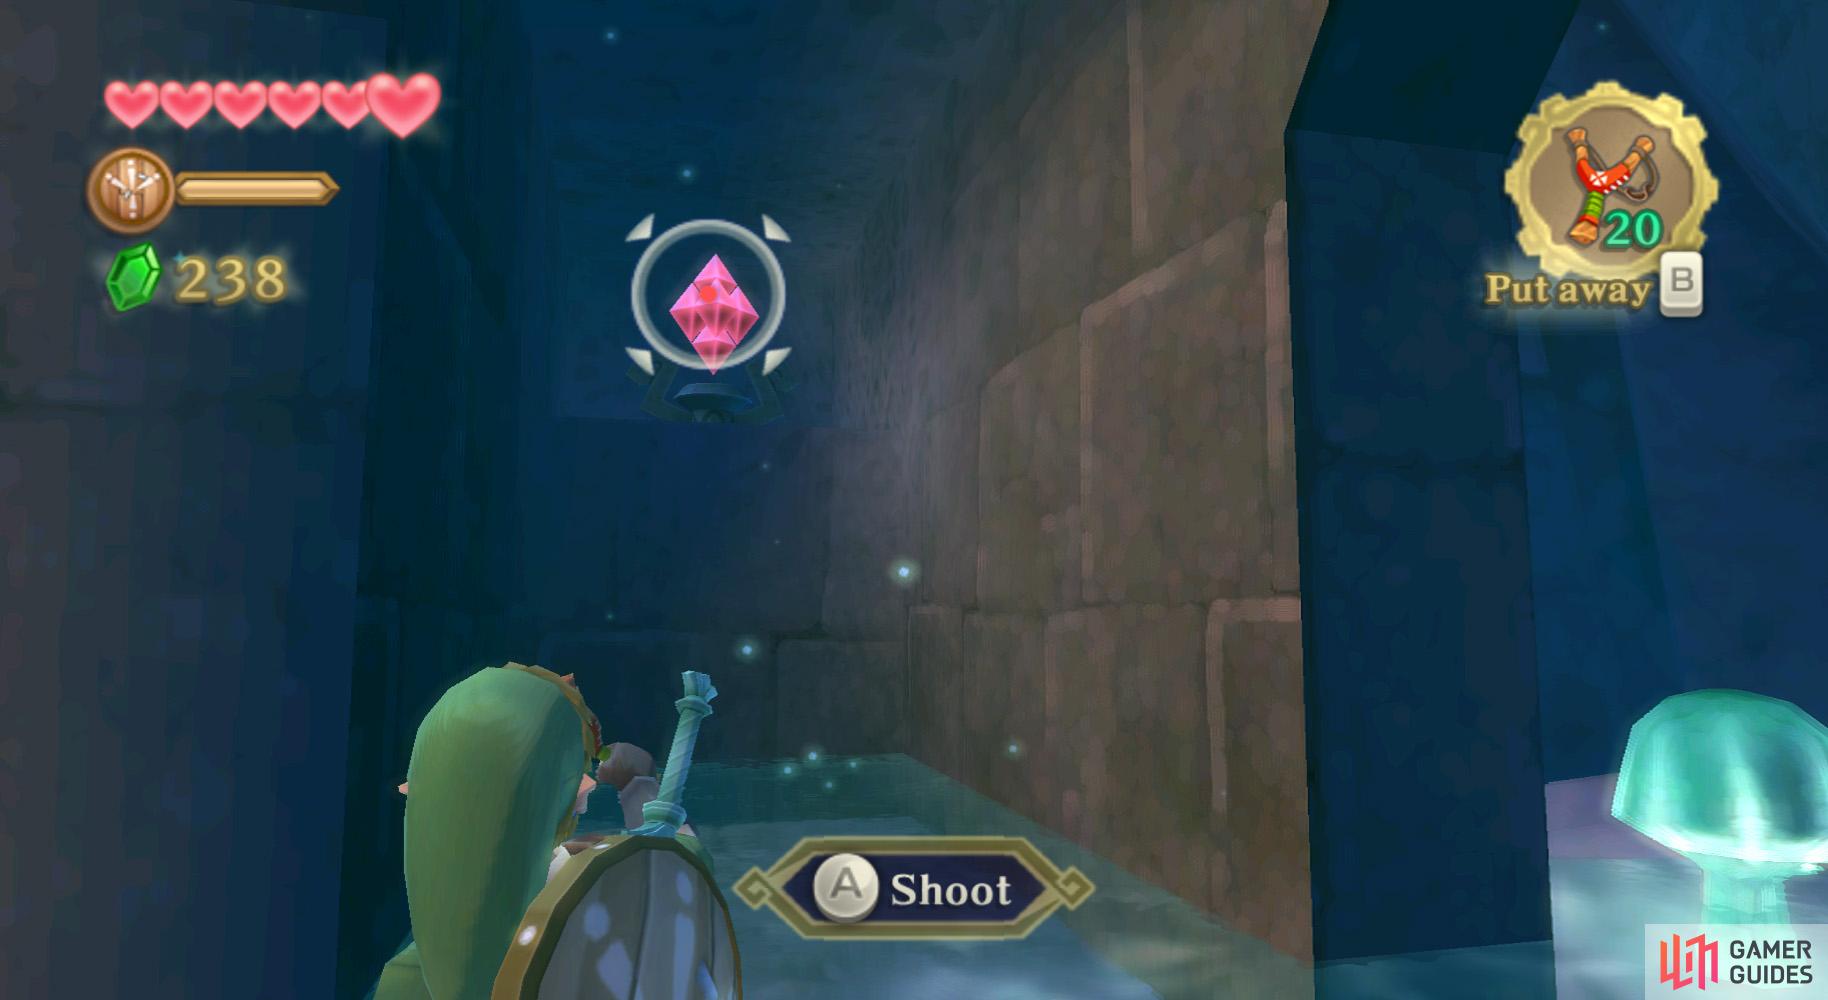 By the way, you can also shoot this switch before raising the water.